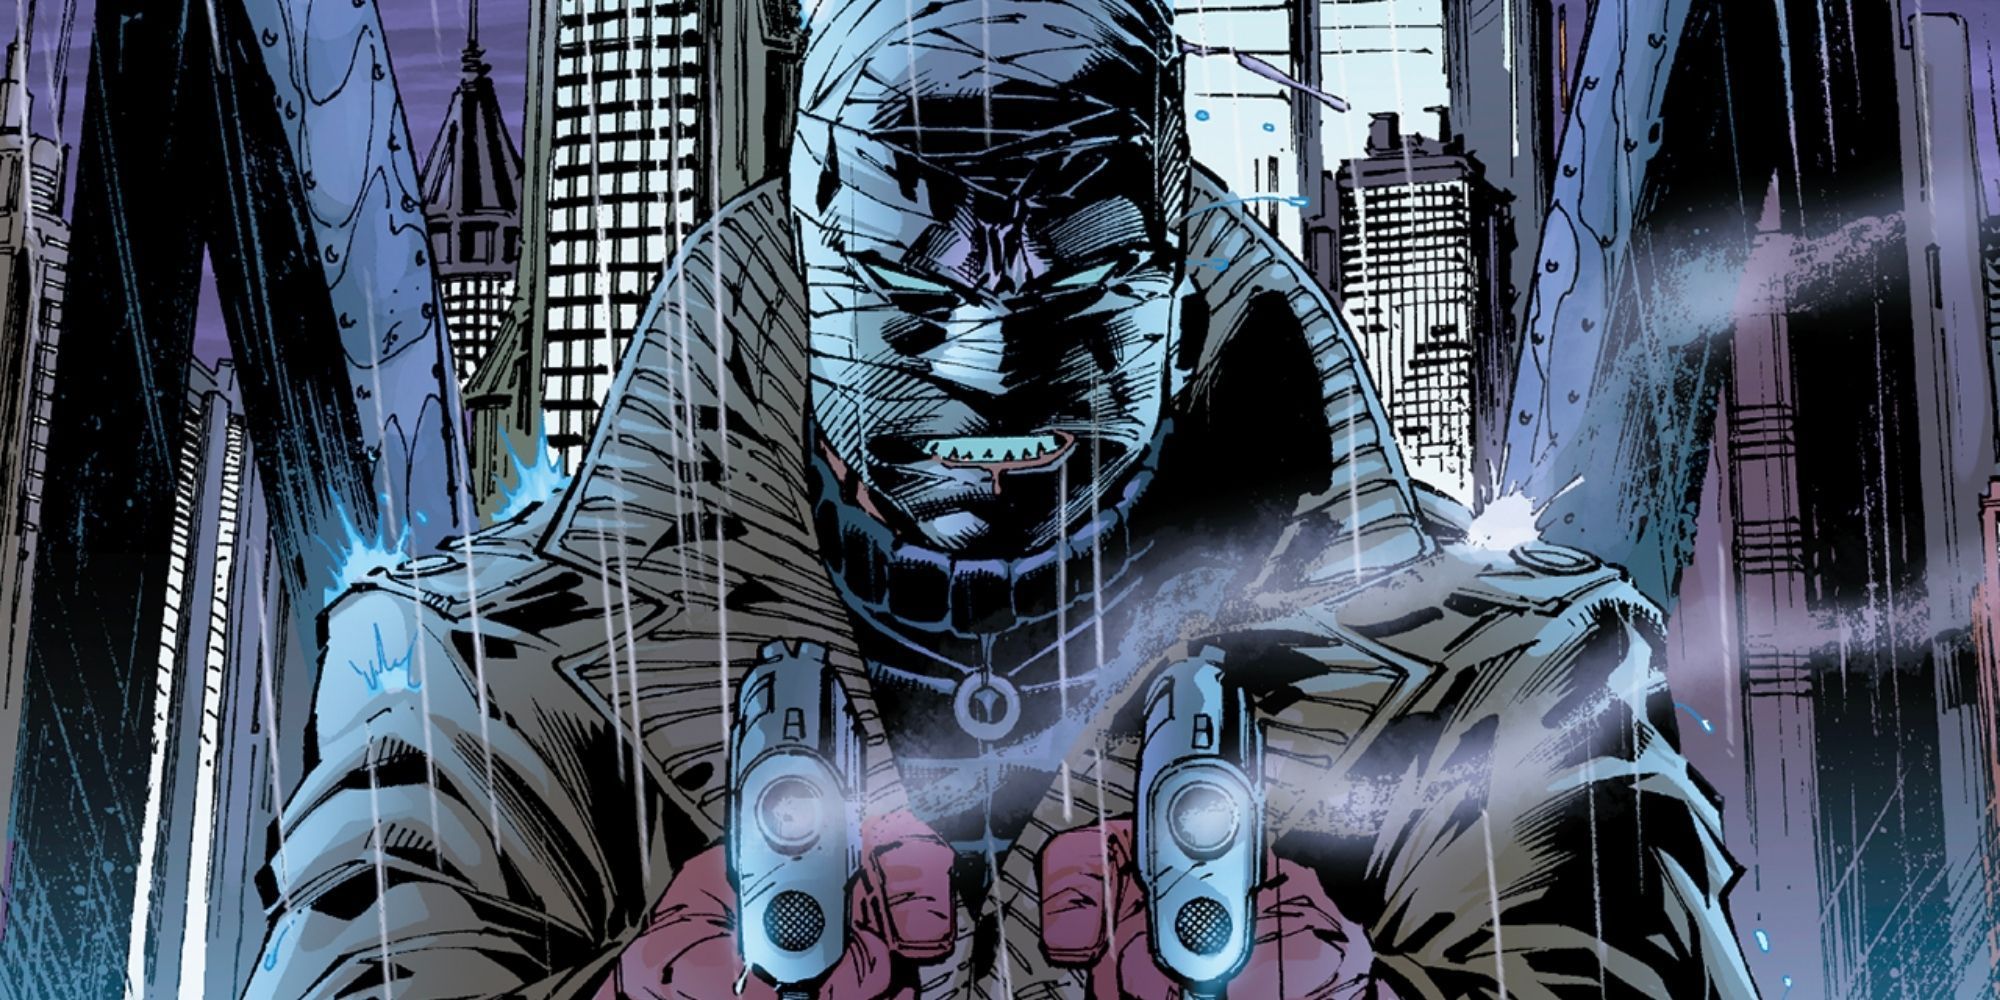 An image of Hush holding two smoking guns in the rain from the 2003 storyline, "Batman: Hush."